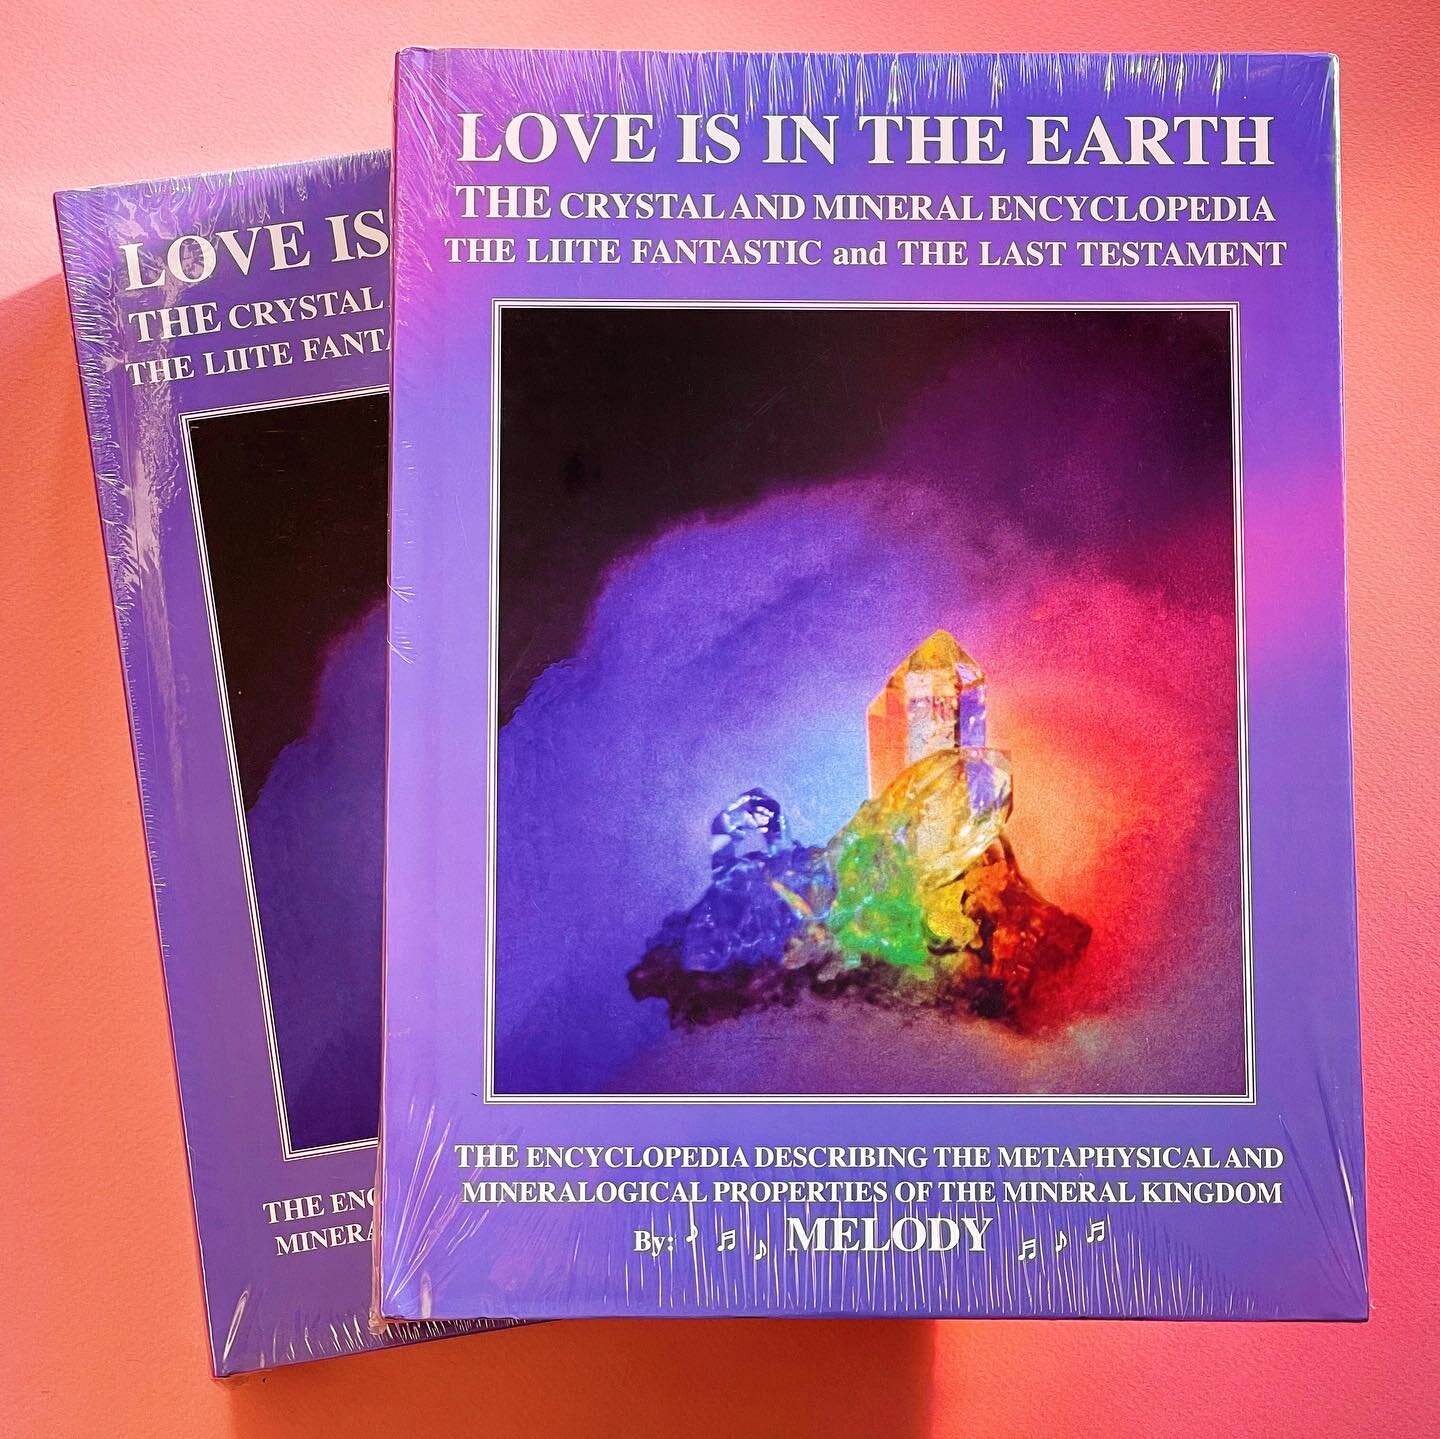 💎🌈 Love Is In The Earth 💎🌈
We have 2 vintage copies of Melody&rsquo;s crystal and mineral encyclopedia for sale at the store!

This Metaphysical Mineralogical Encyclopedia describes over 1400 minerals and crystals illustrated with over 1400 color